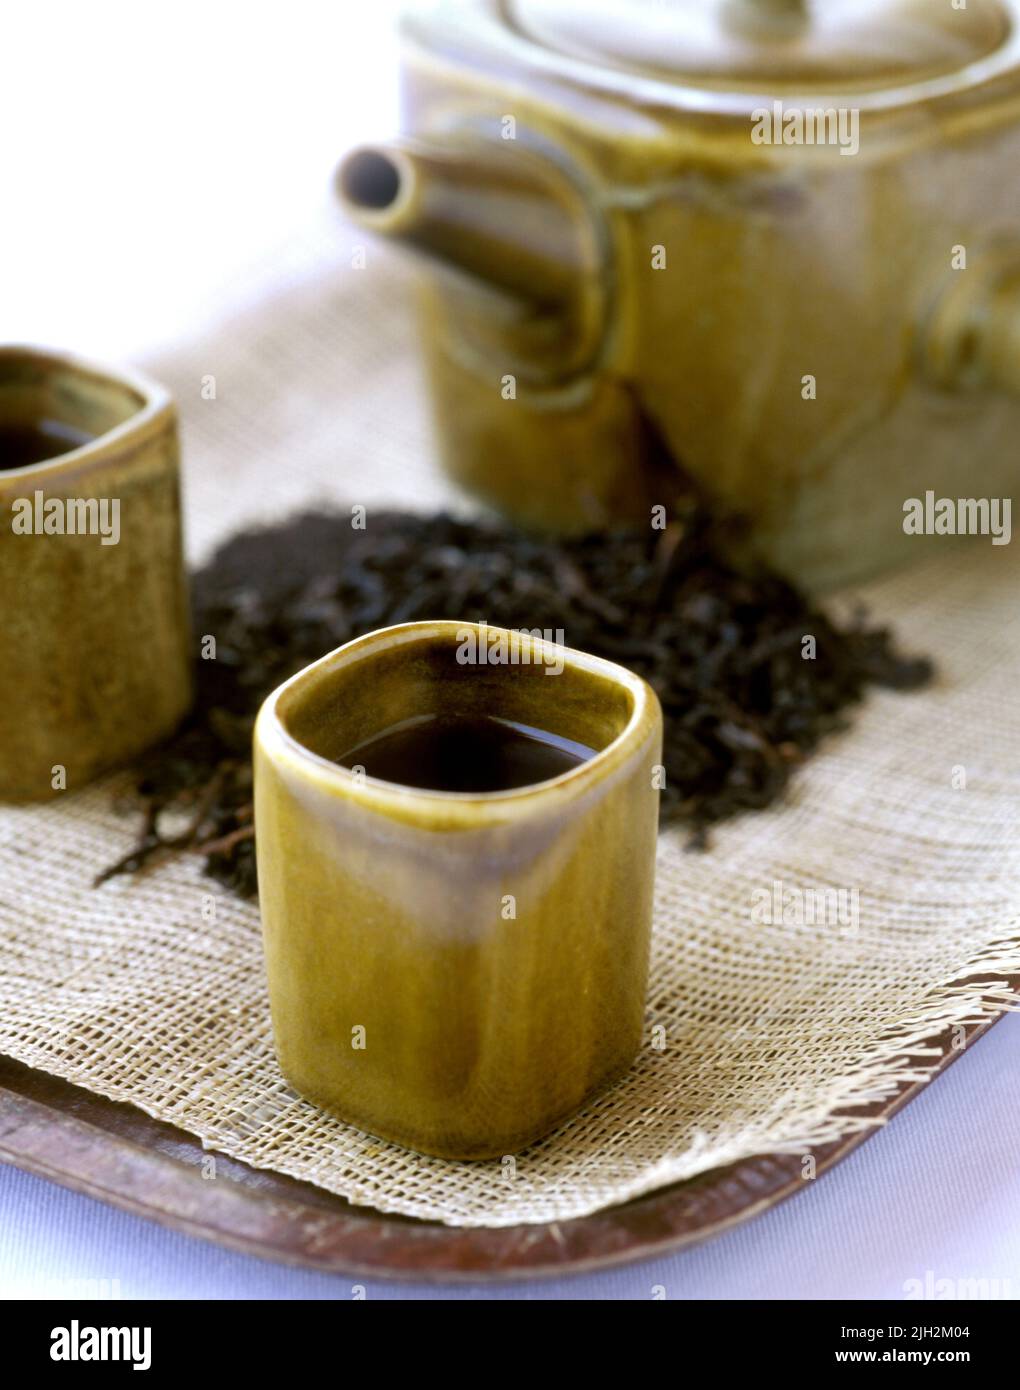 Herbal black  tea leaves with teacups and teapot Stock Photo